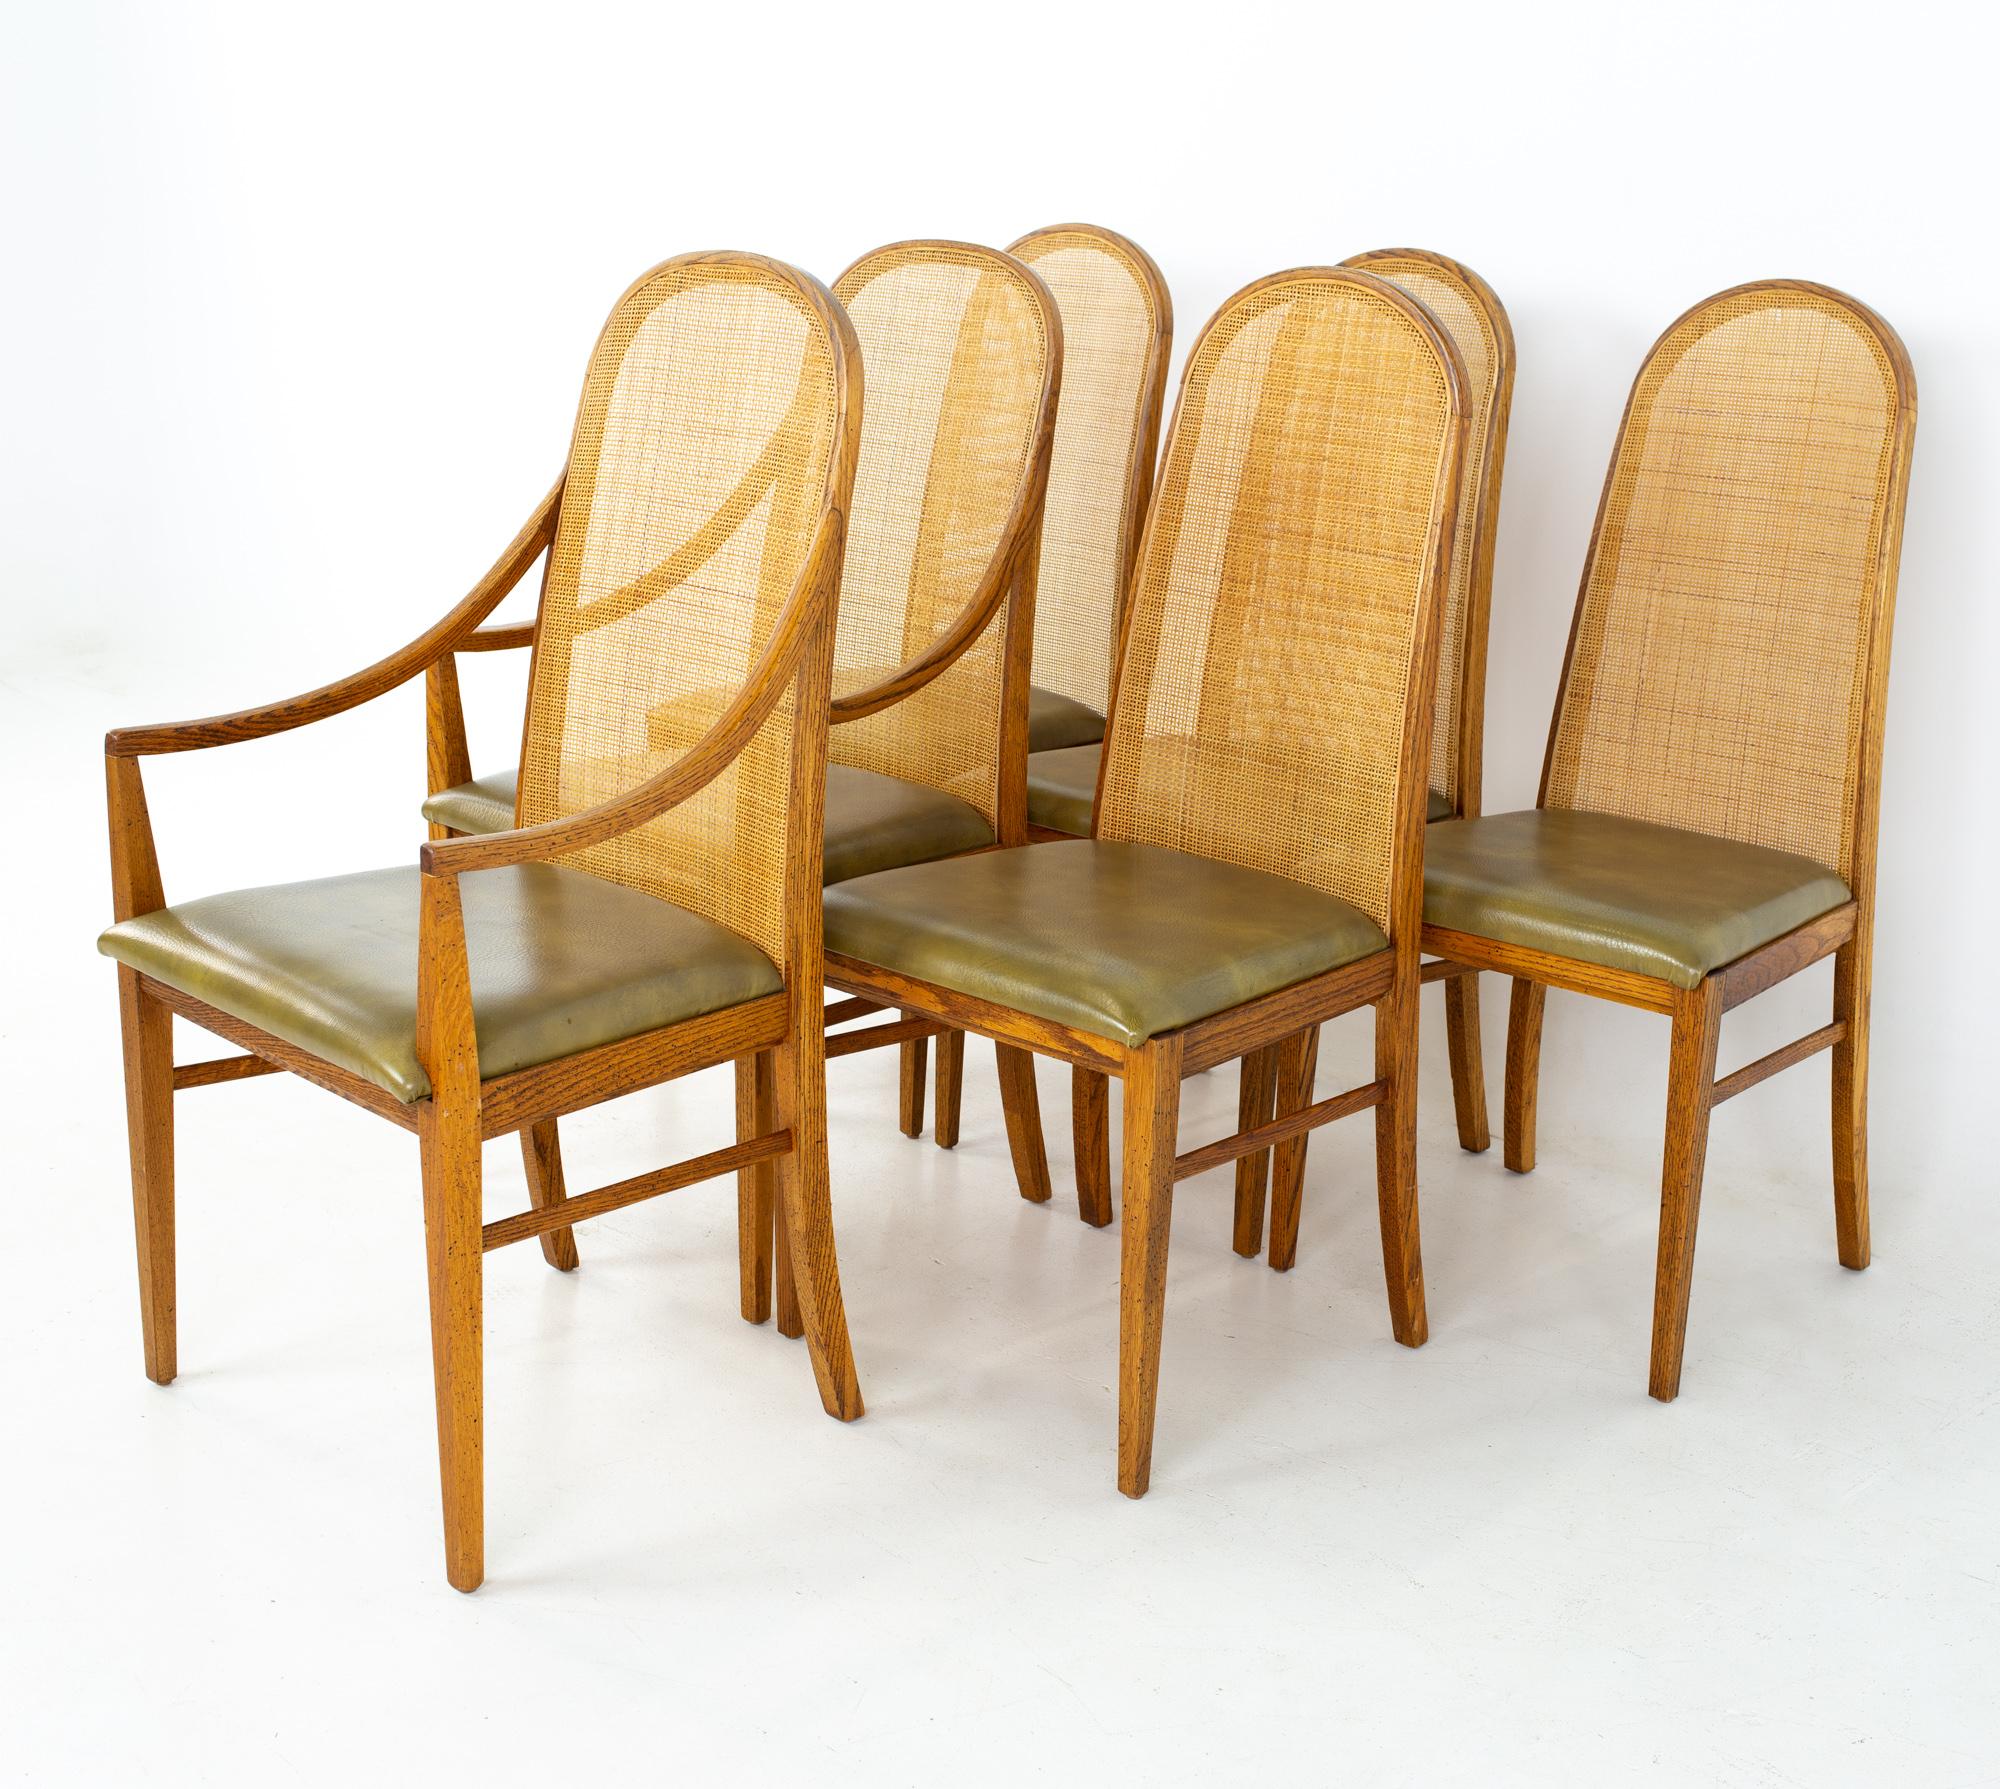 Dillingham Style Mid Century oak and cane dining chairs, set of 6
Each chair measures: 20.75 wide x 18 deep x 41 high, with a seat height of 19 inches

All pieces of furniture can be had in what we call restored vintage condition. That means the